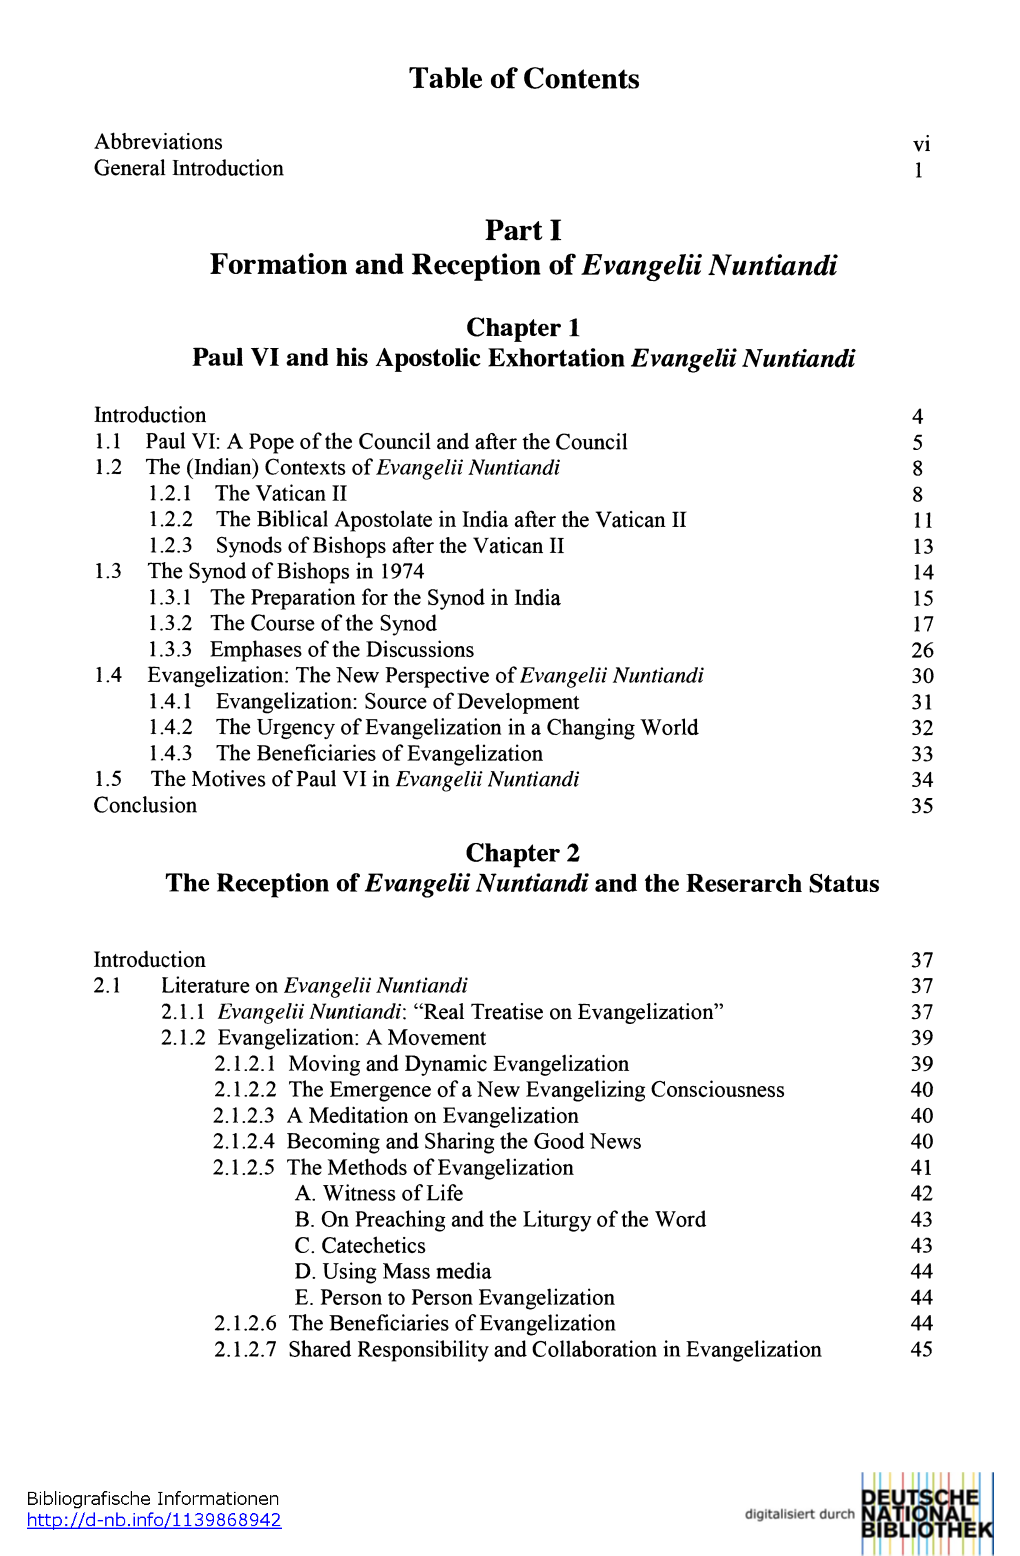 Table of Contents Part I Formation and Reception of Evangelii Nuntiandi